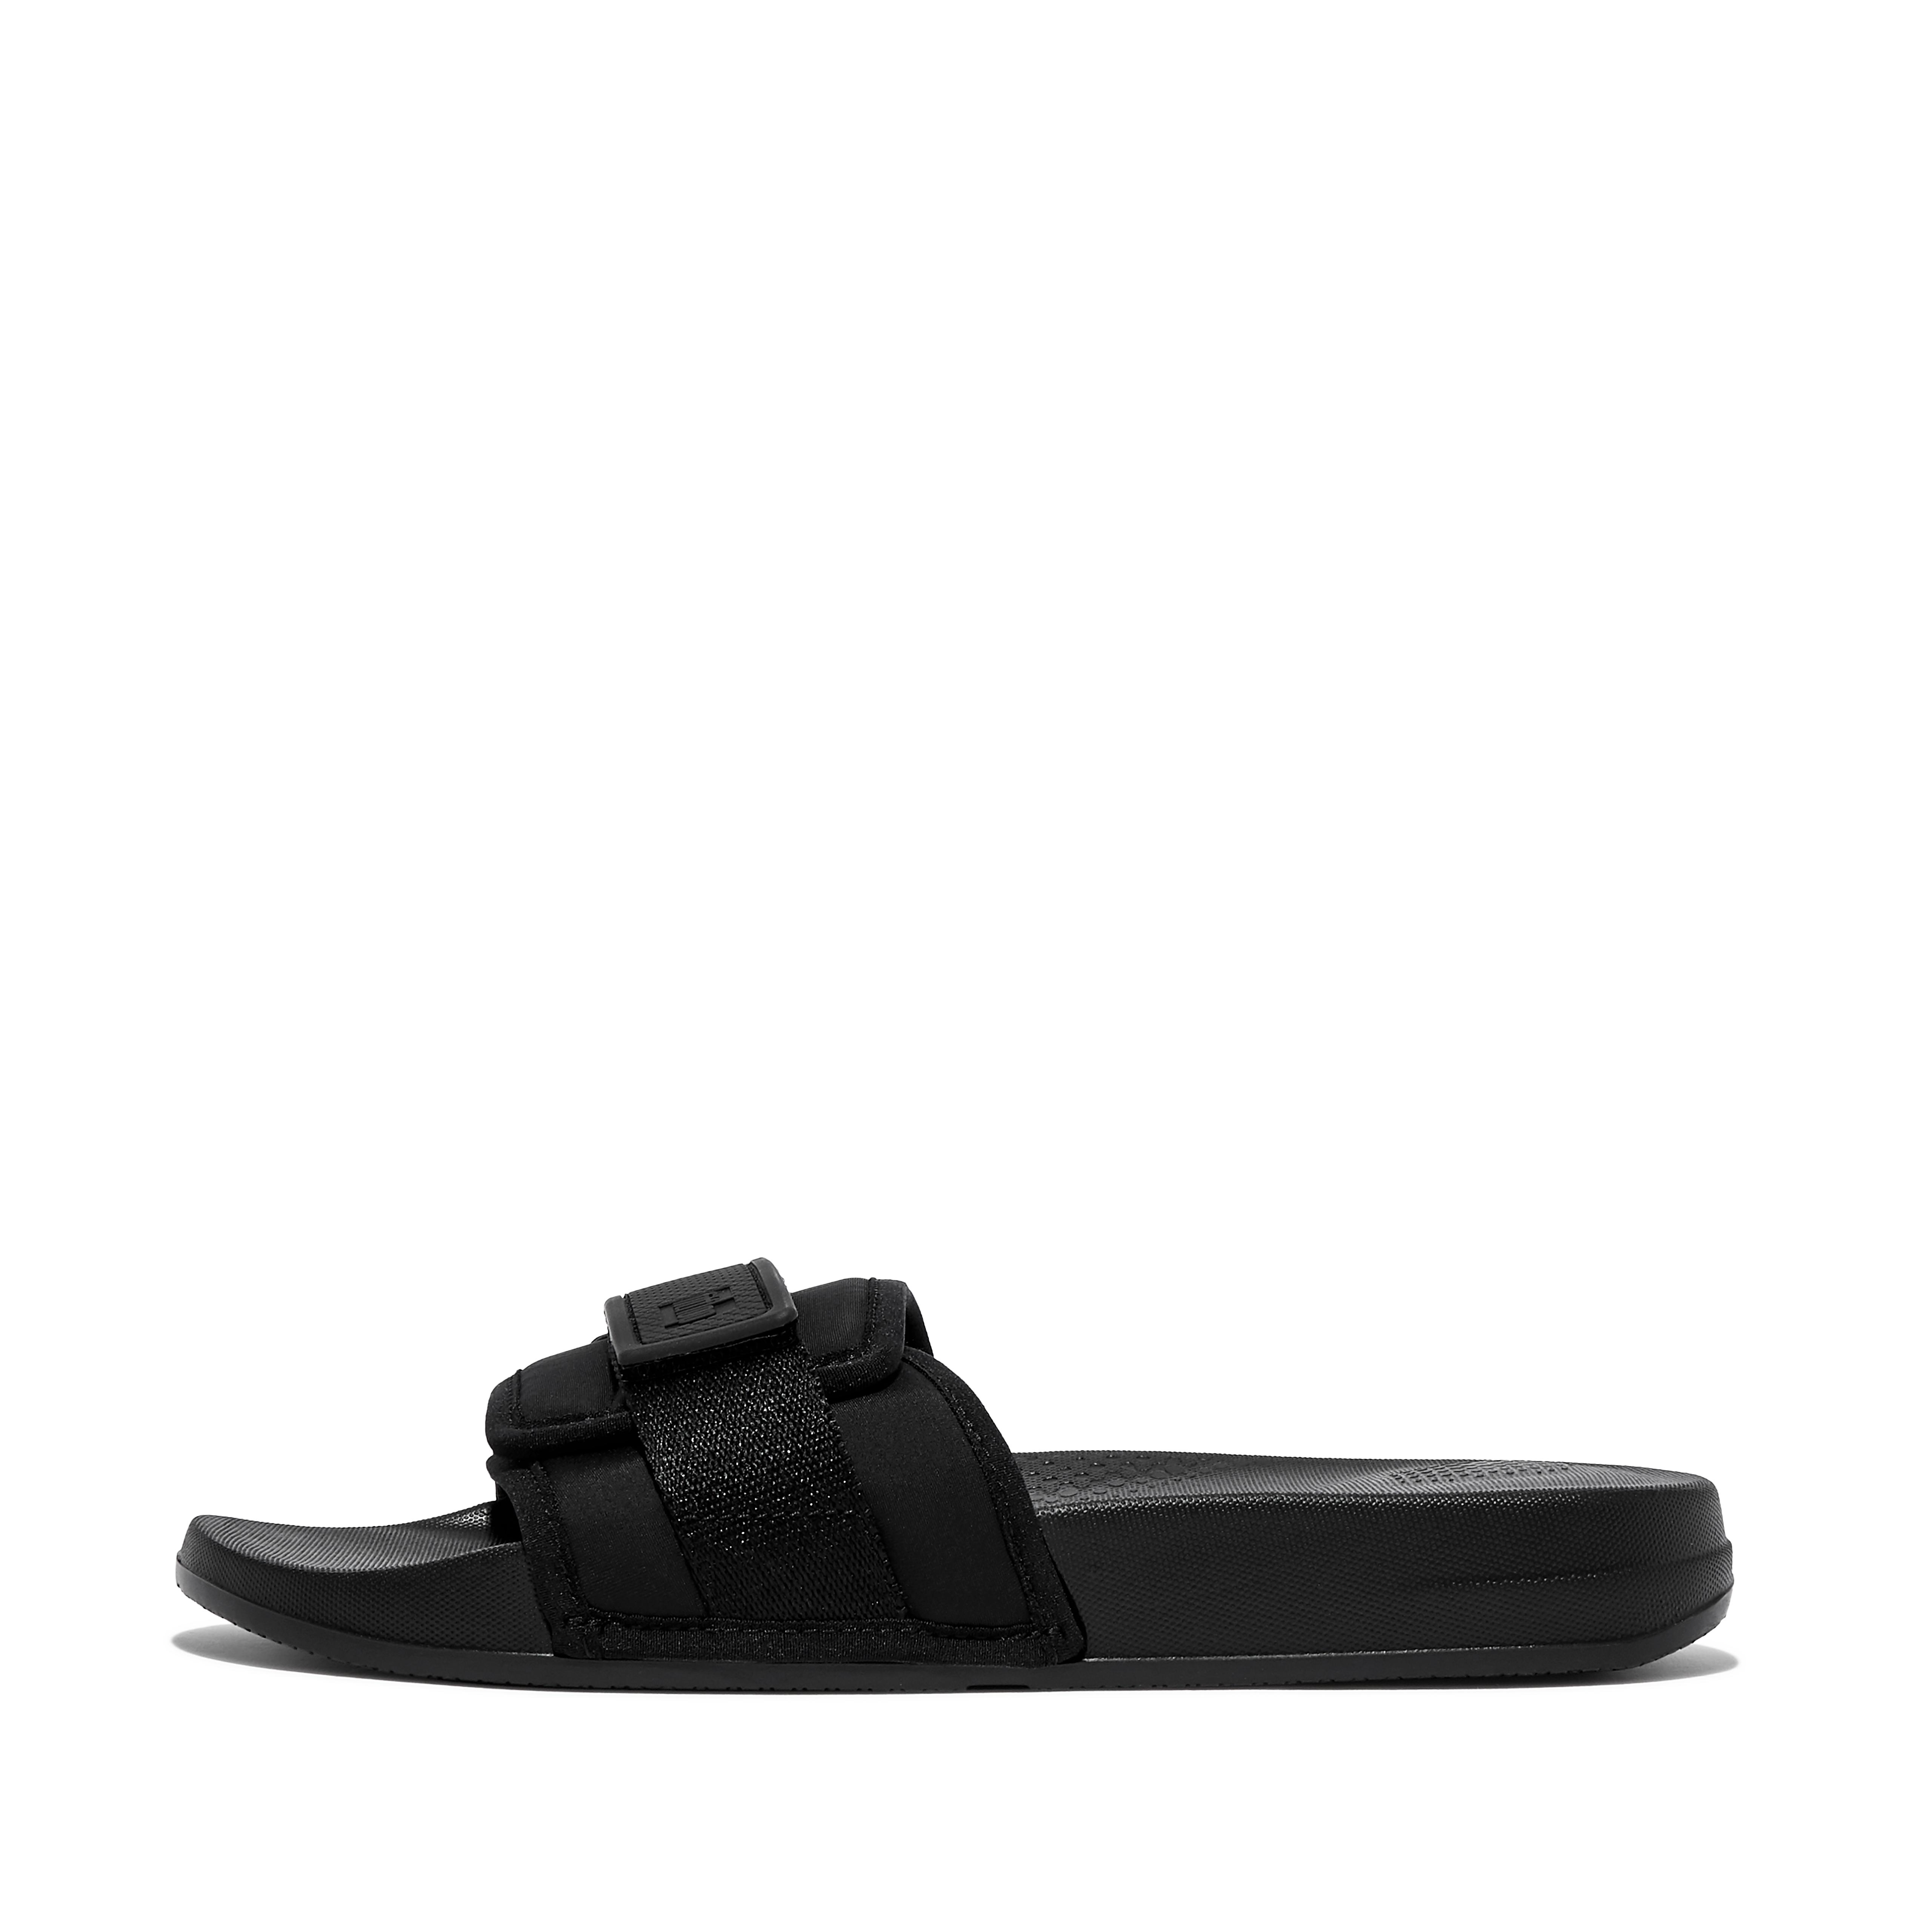 Women's iQushion Adjustable Pool Slides | FitFlop UK